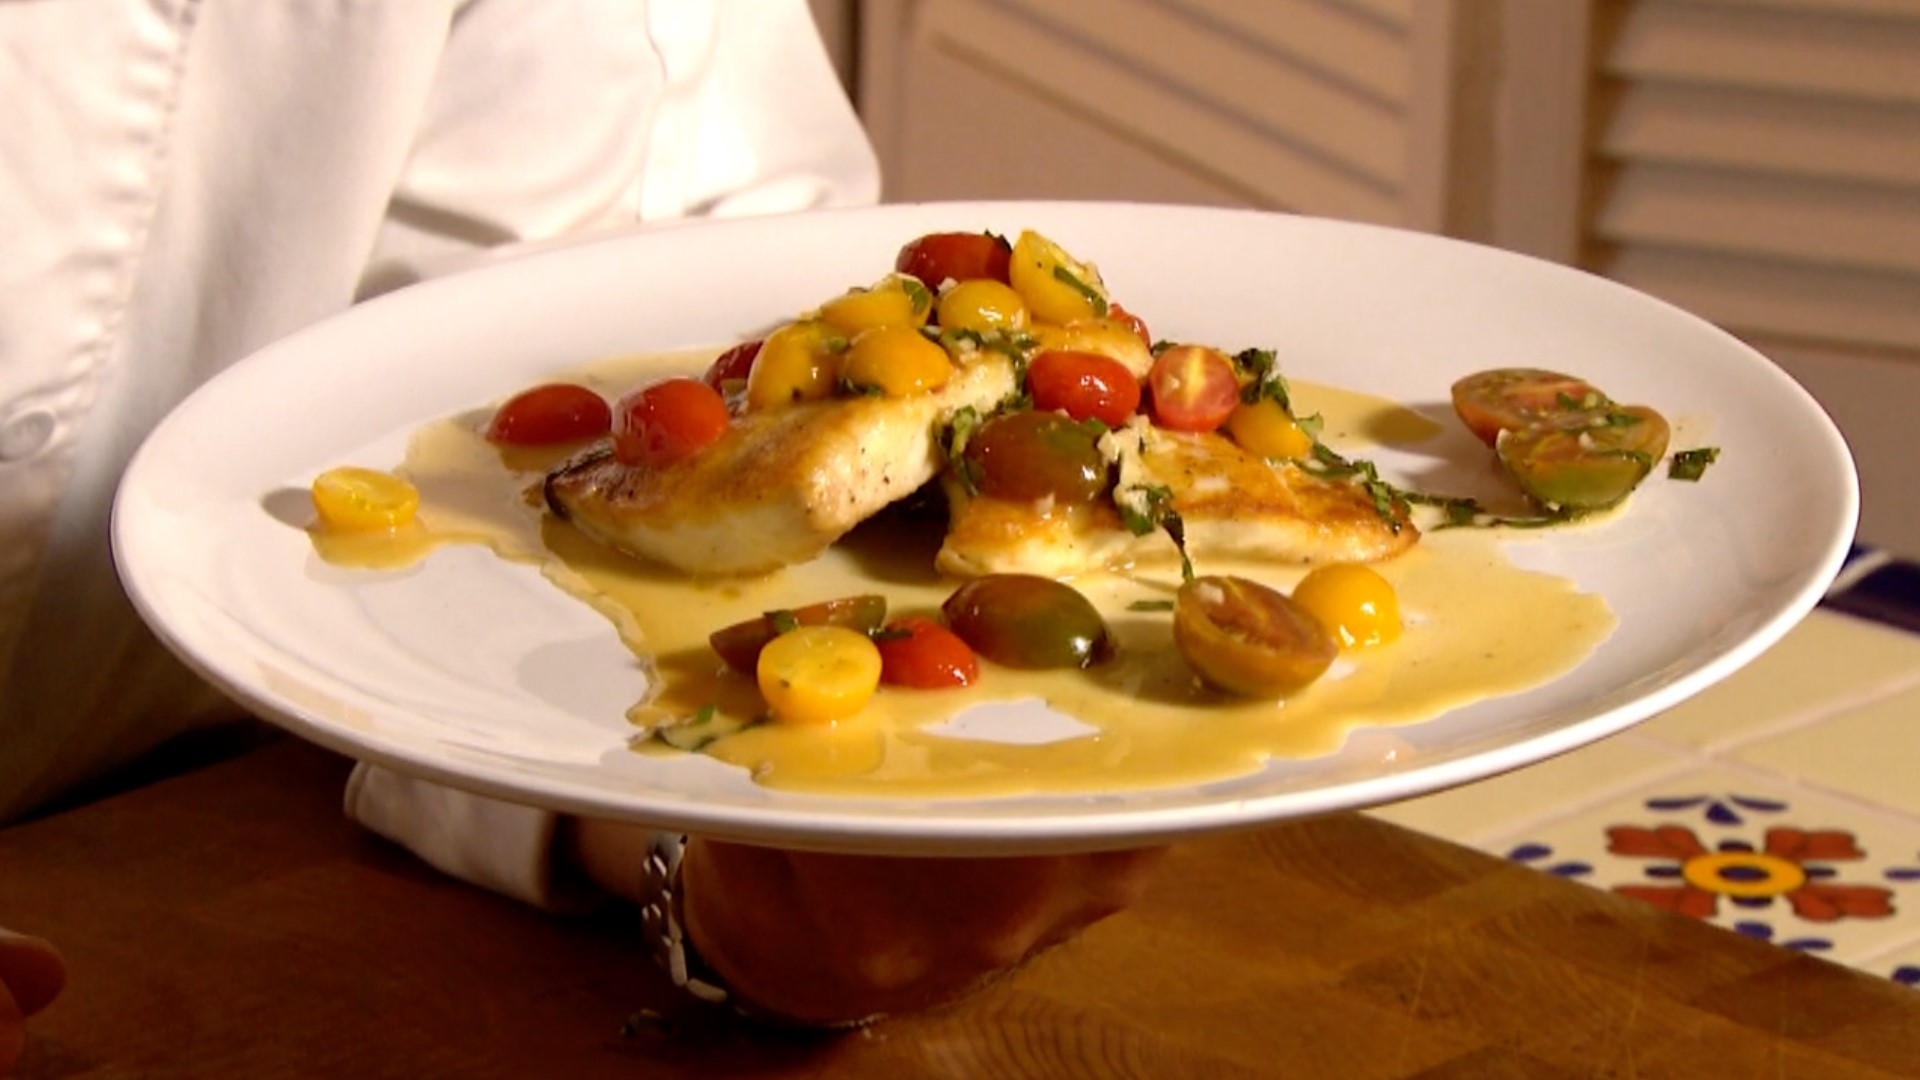 A classic halibut recipe that's easy to make.